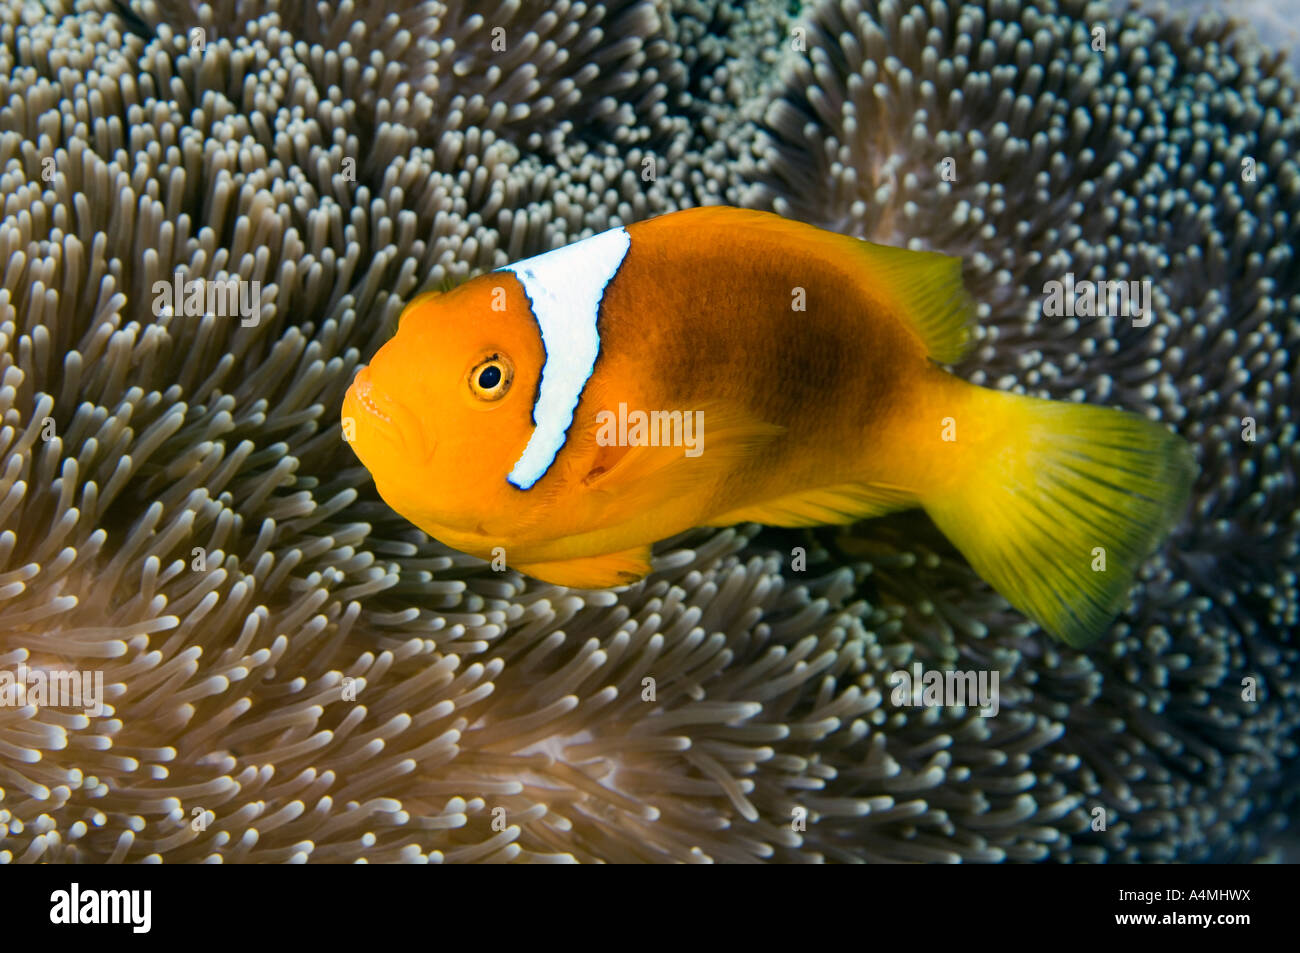 A white bonnet anemonefish swimming in the tentacles of its anemone Stock Photo